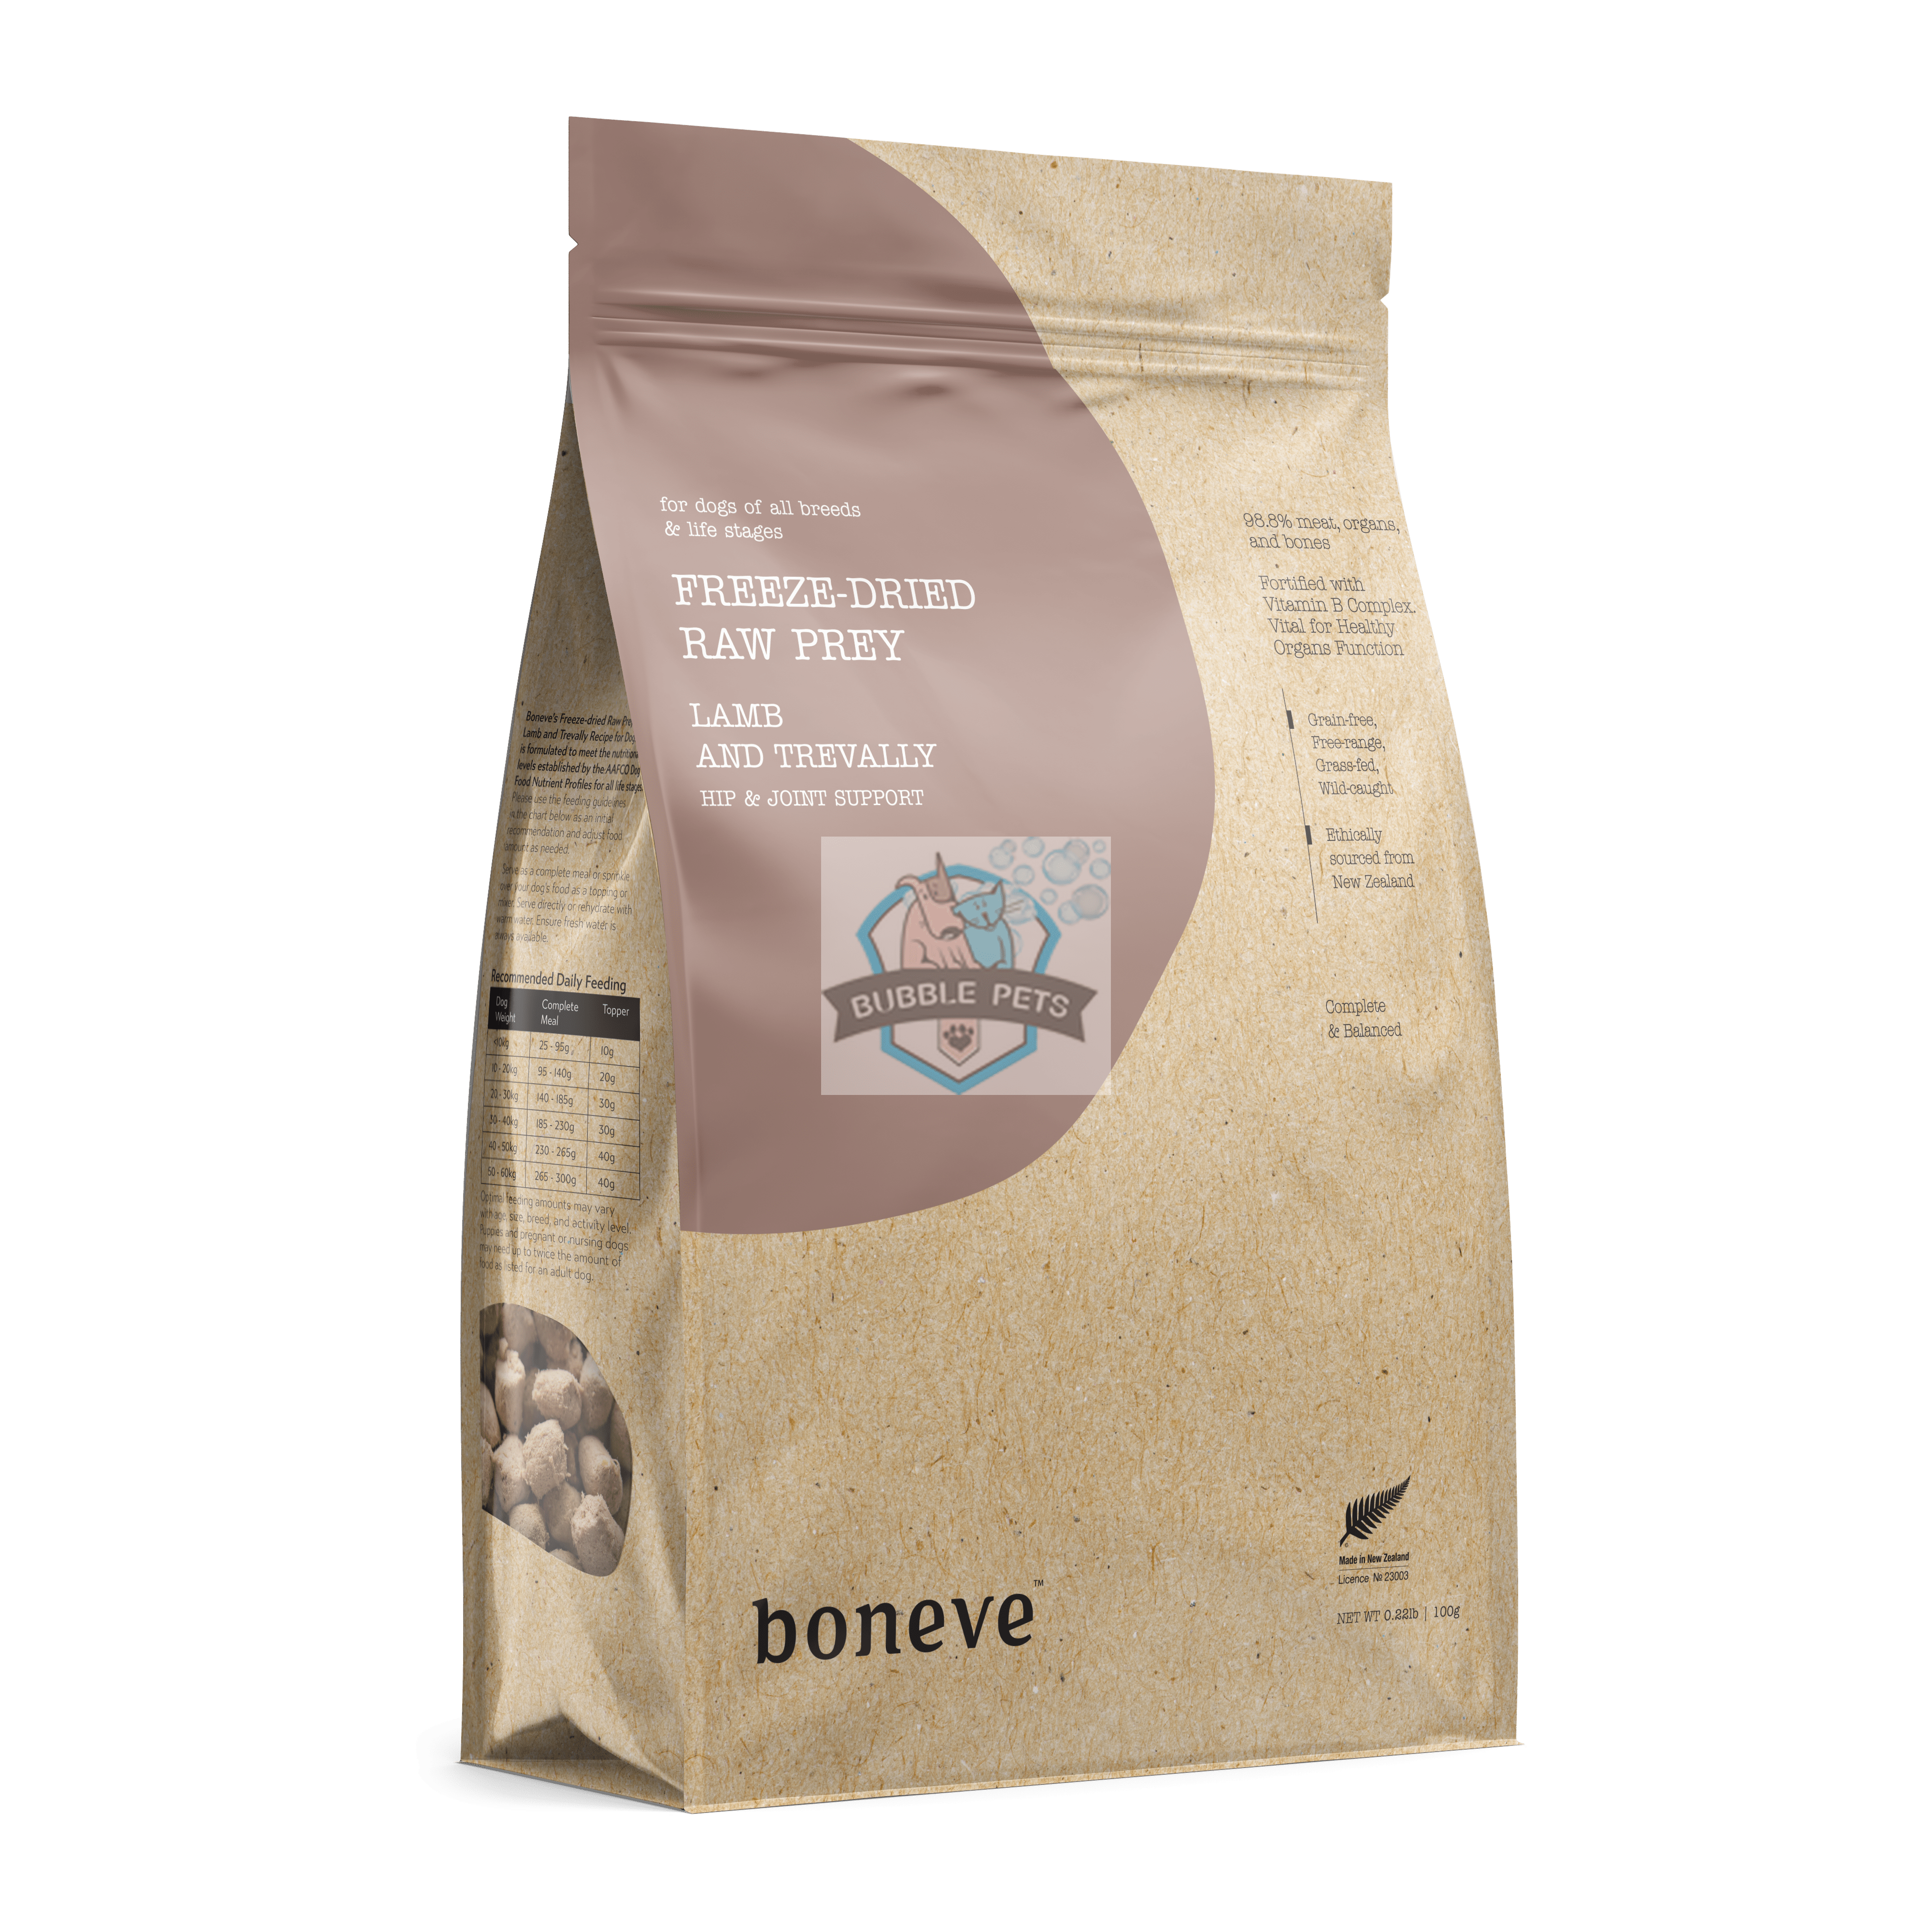 PROMO: ANY 2 FOR $105 Boneve Freeze Dried Food 340g